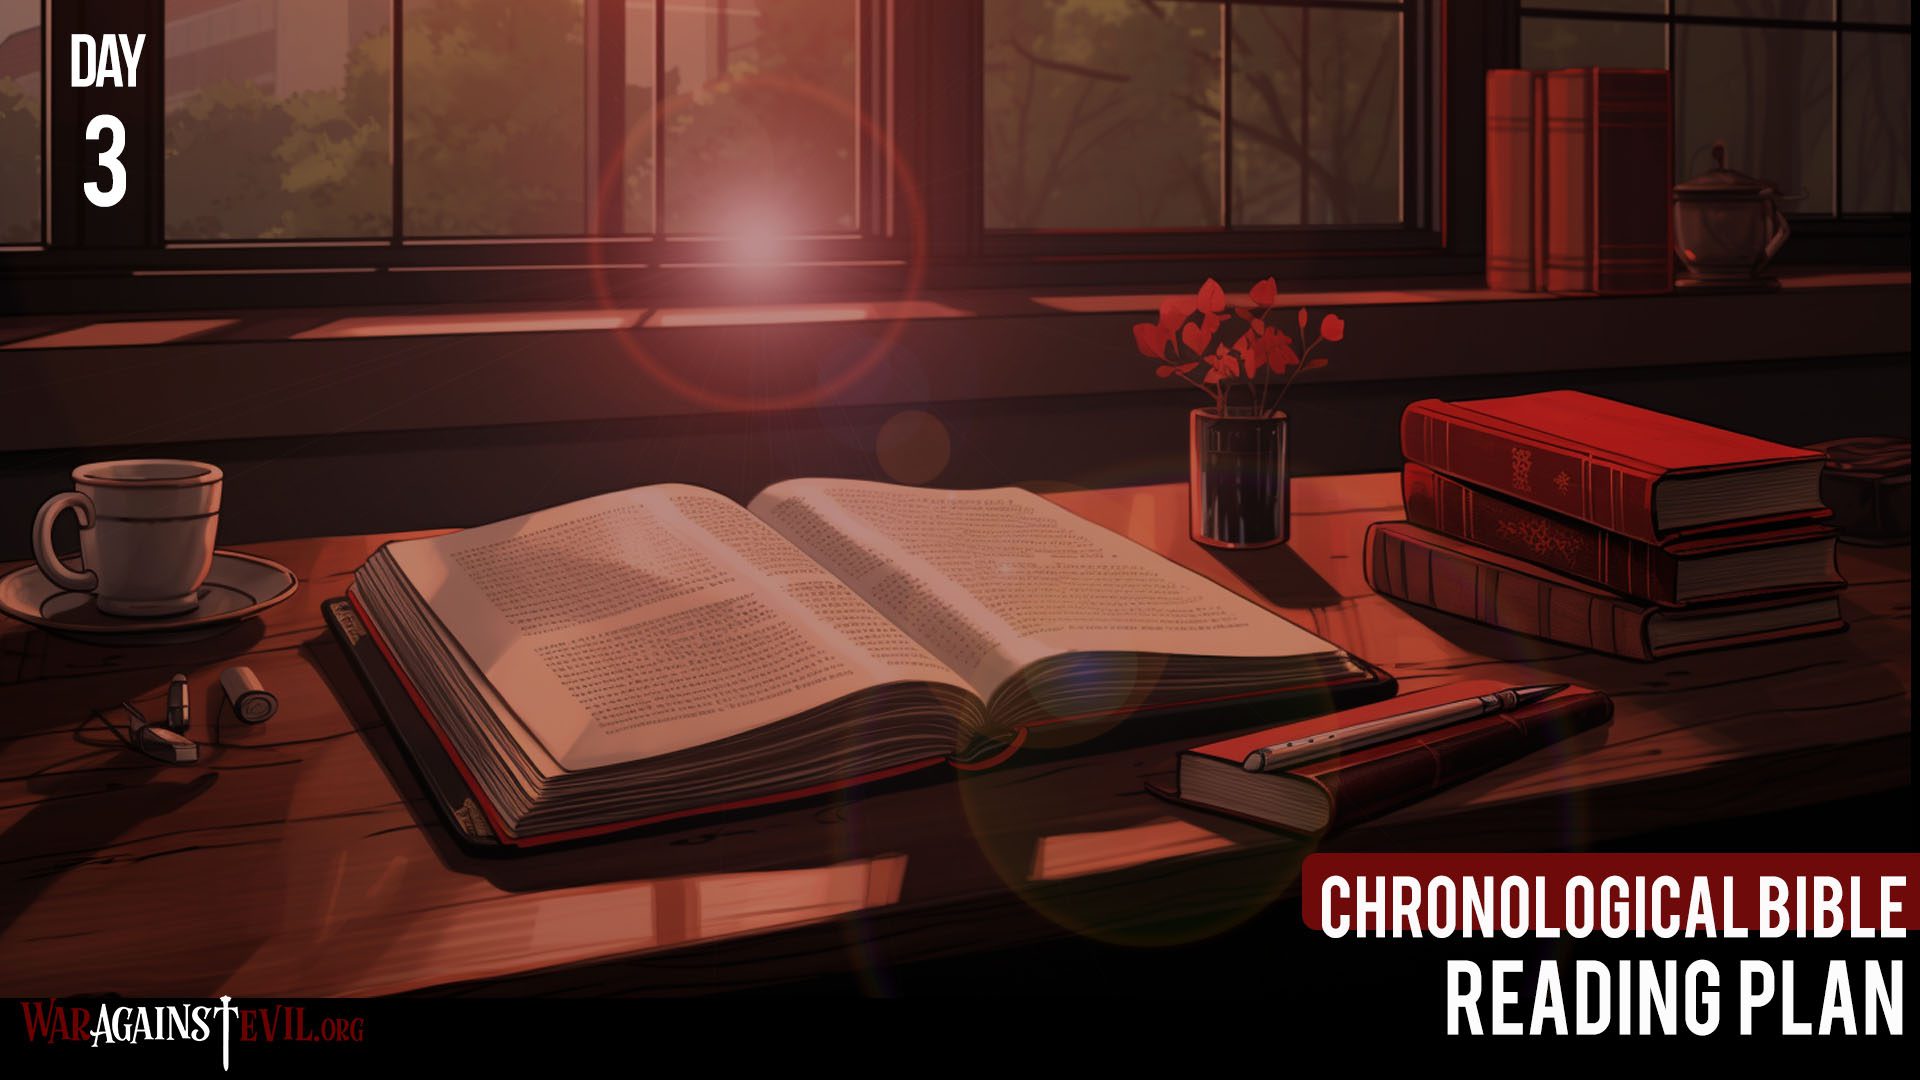 Chronological Bible Reading Plan - Day 3